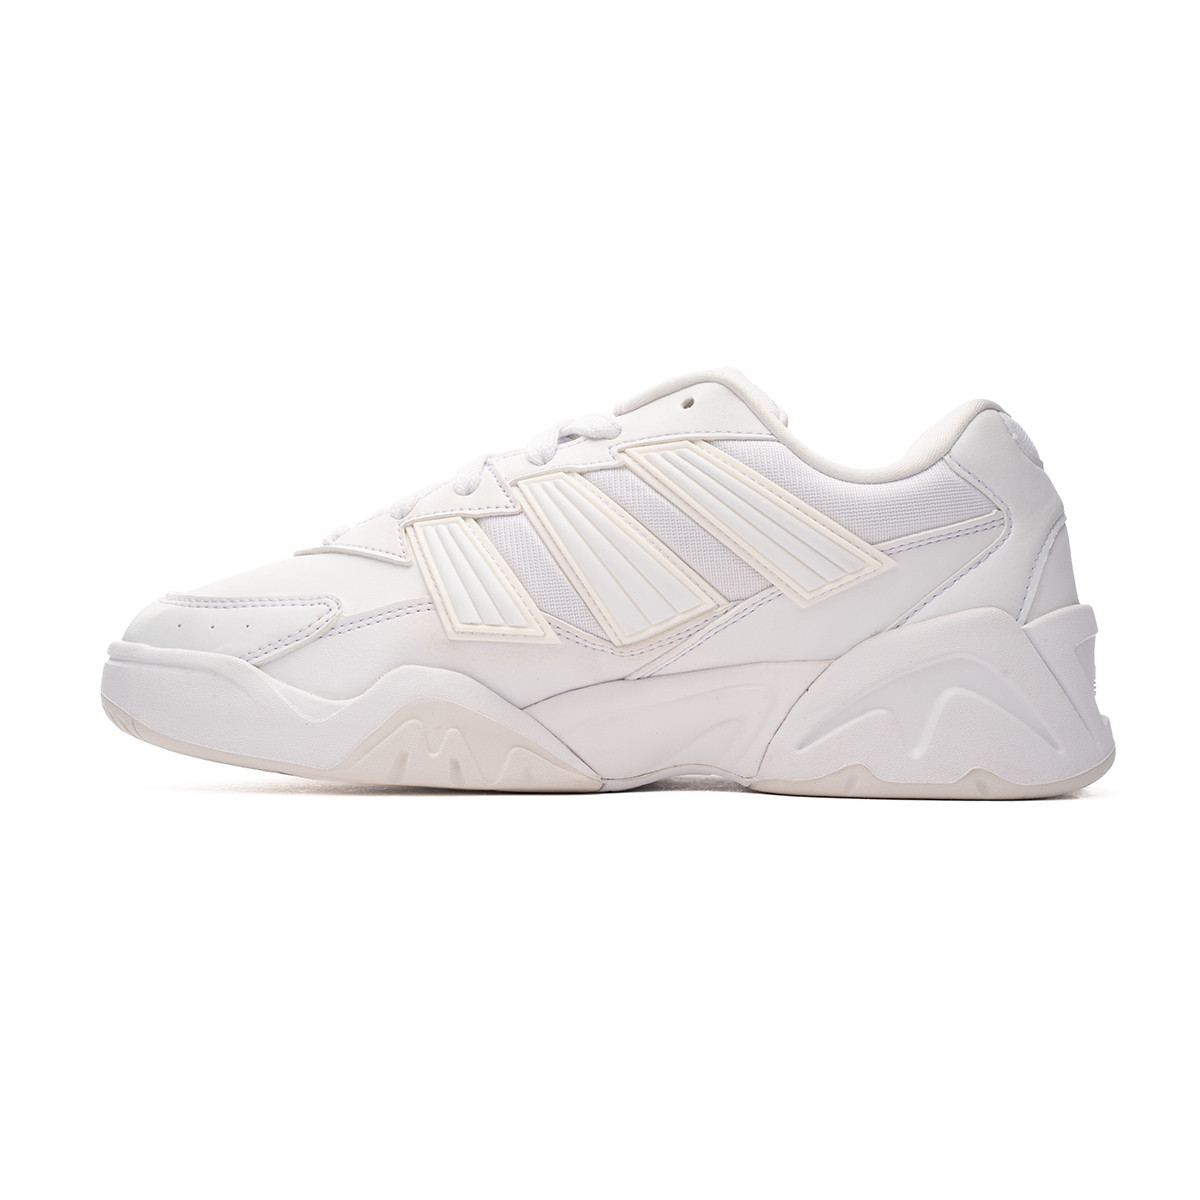 Court - White-White-Crystal White adidas Fútbol Magnetic Emotion Trainers